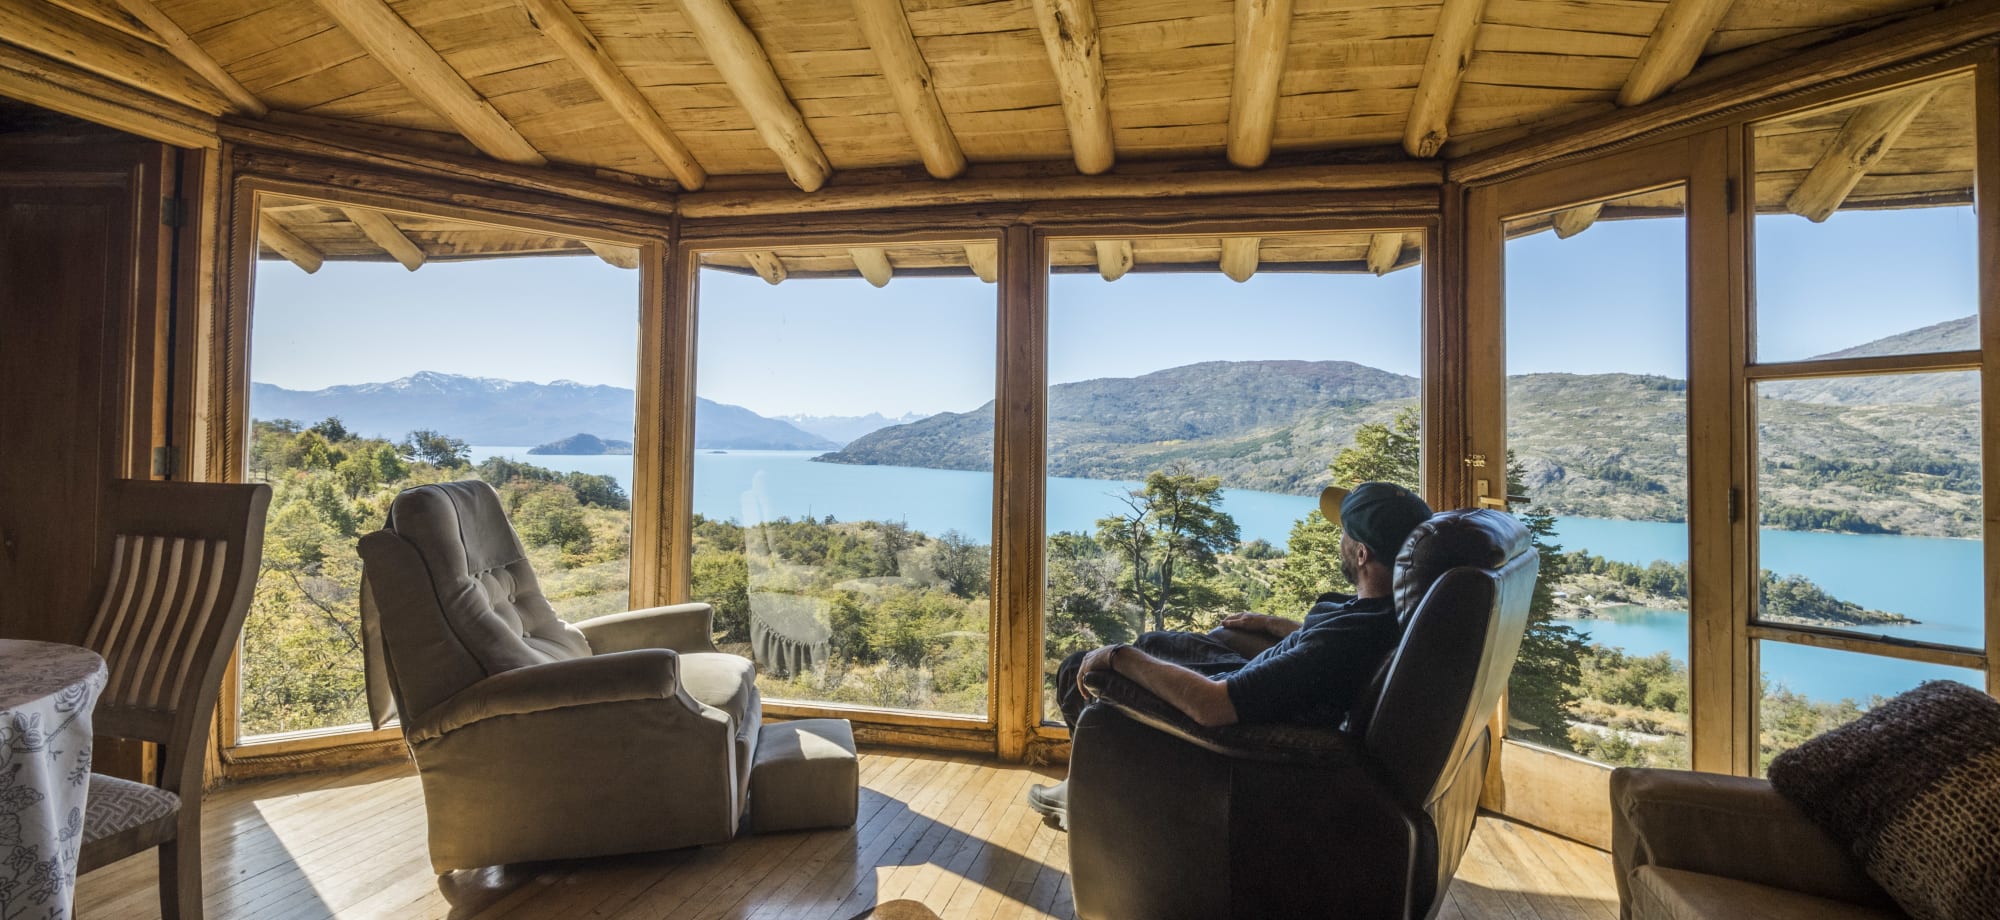 A man sits in a lounge chair looking out of a 360-degree window, offering a view of mountains and a lake.